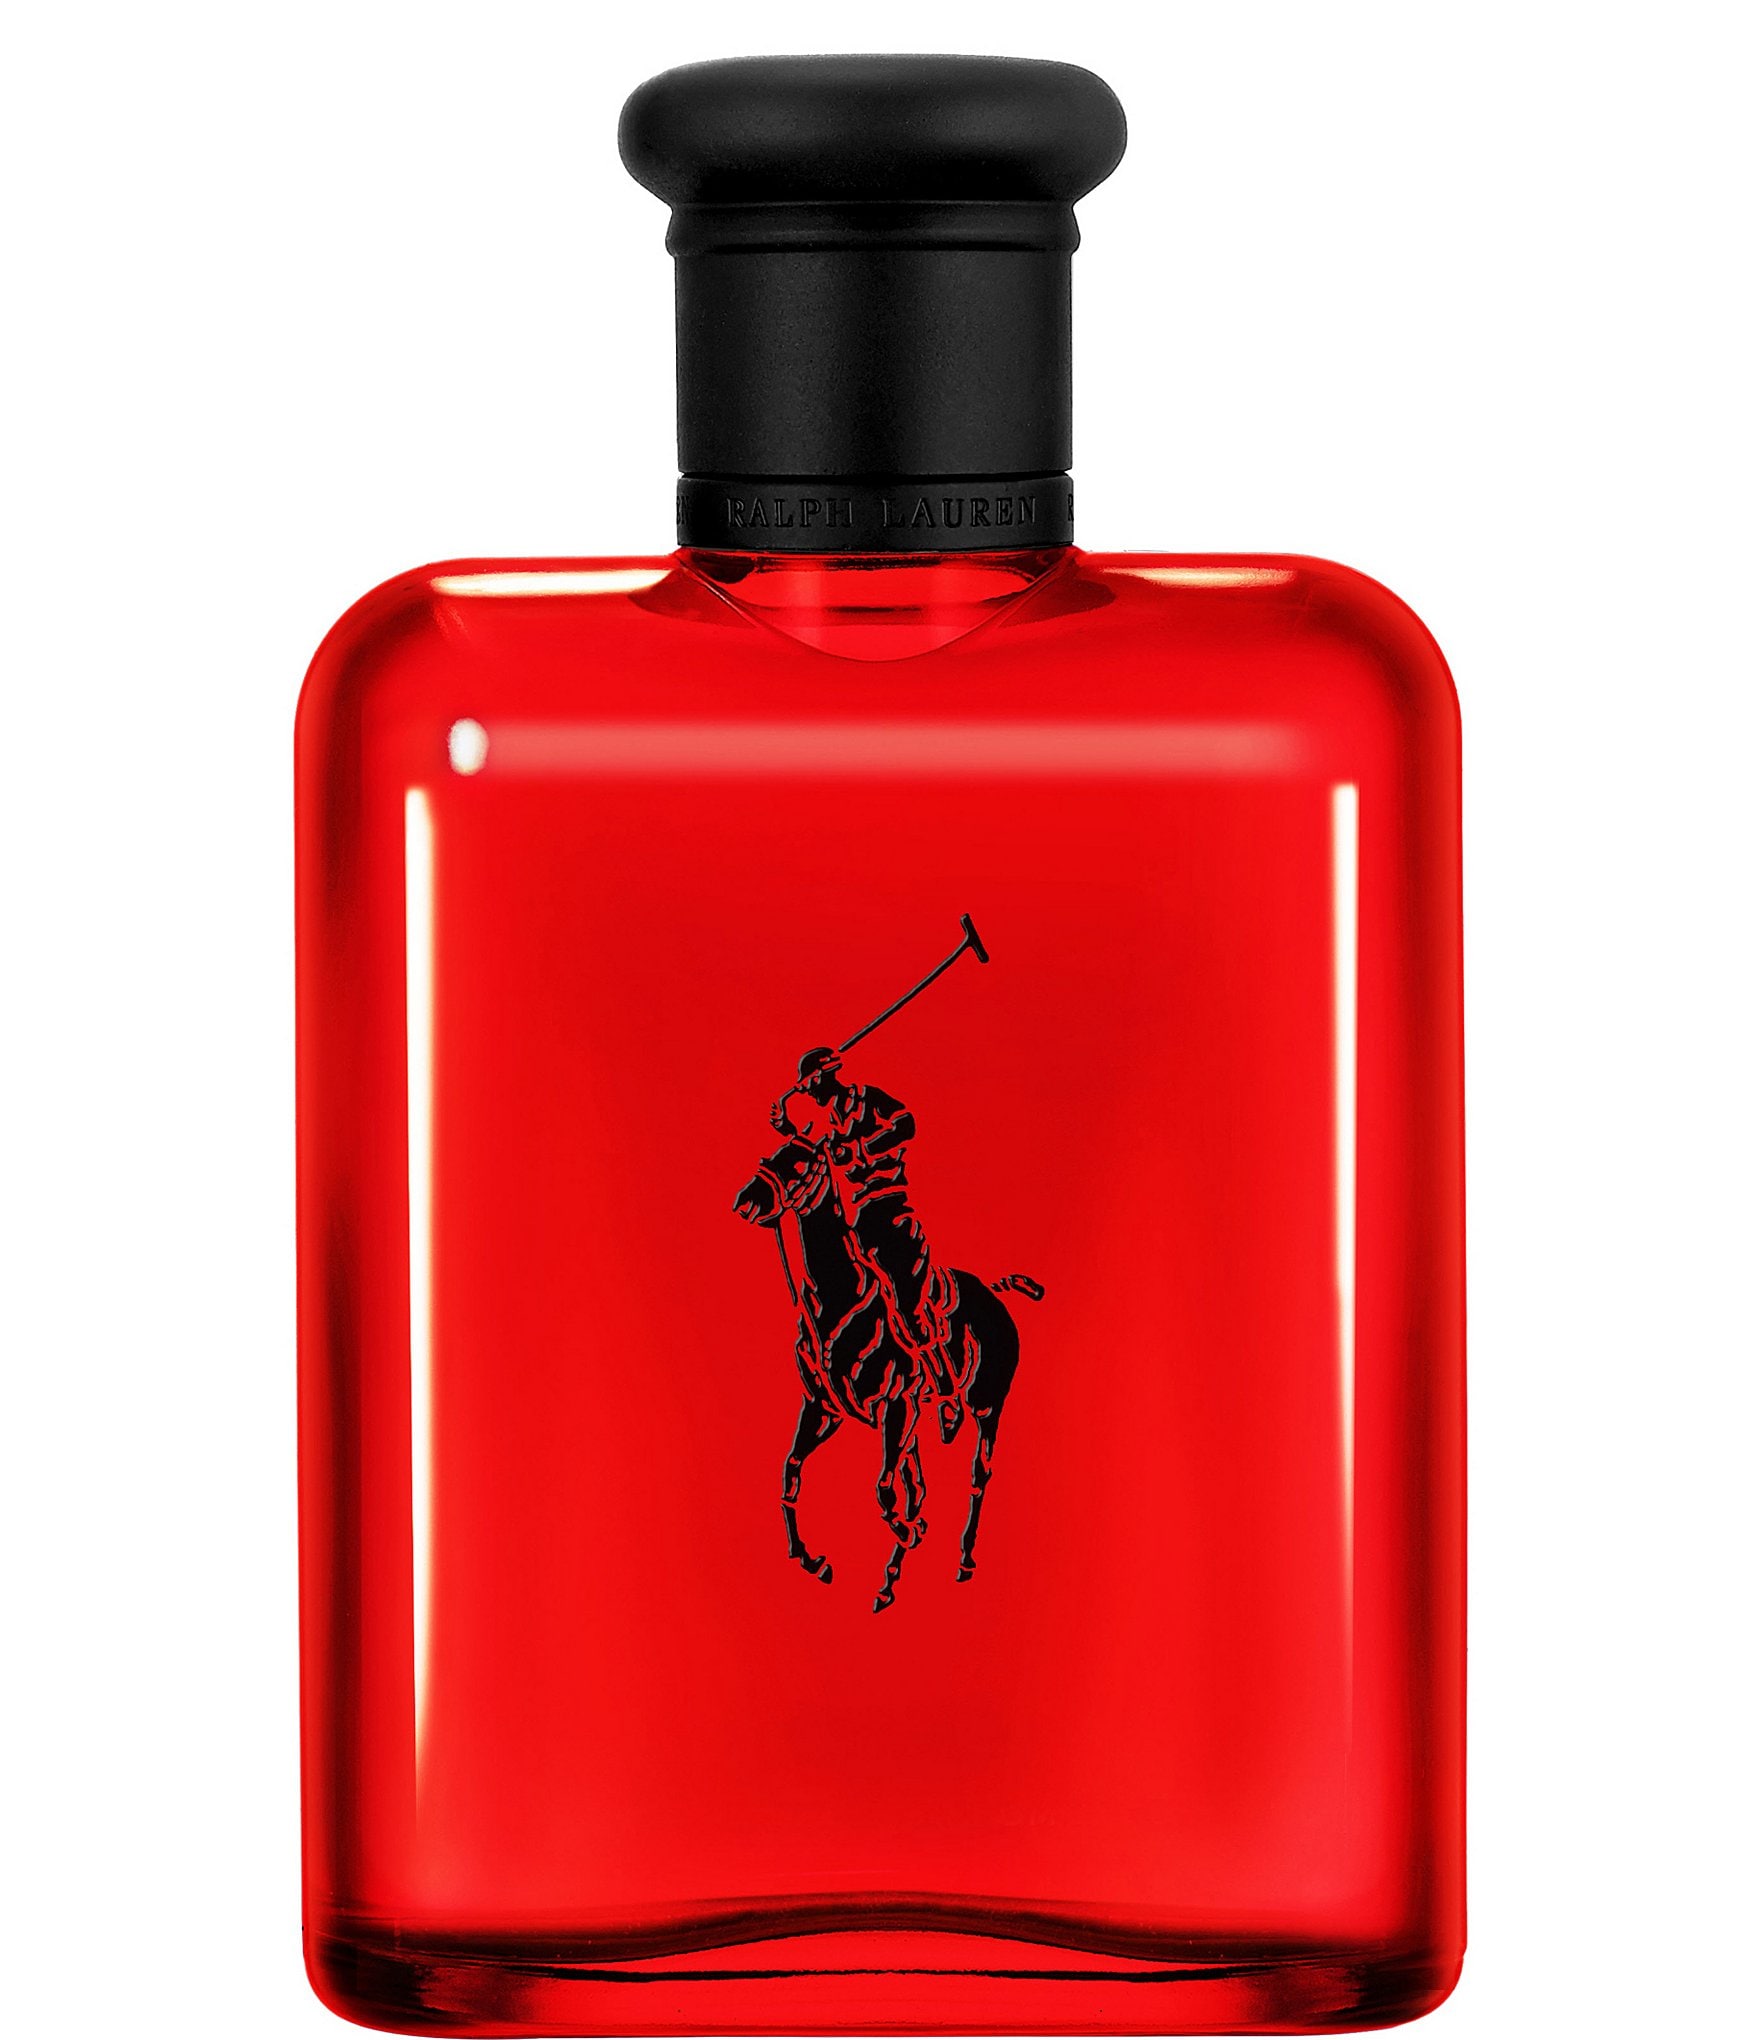 polo red cologne dillards